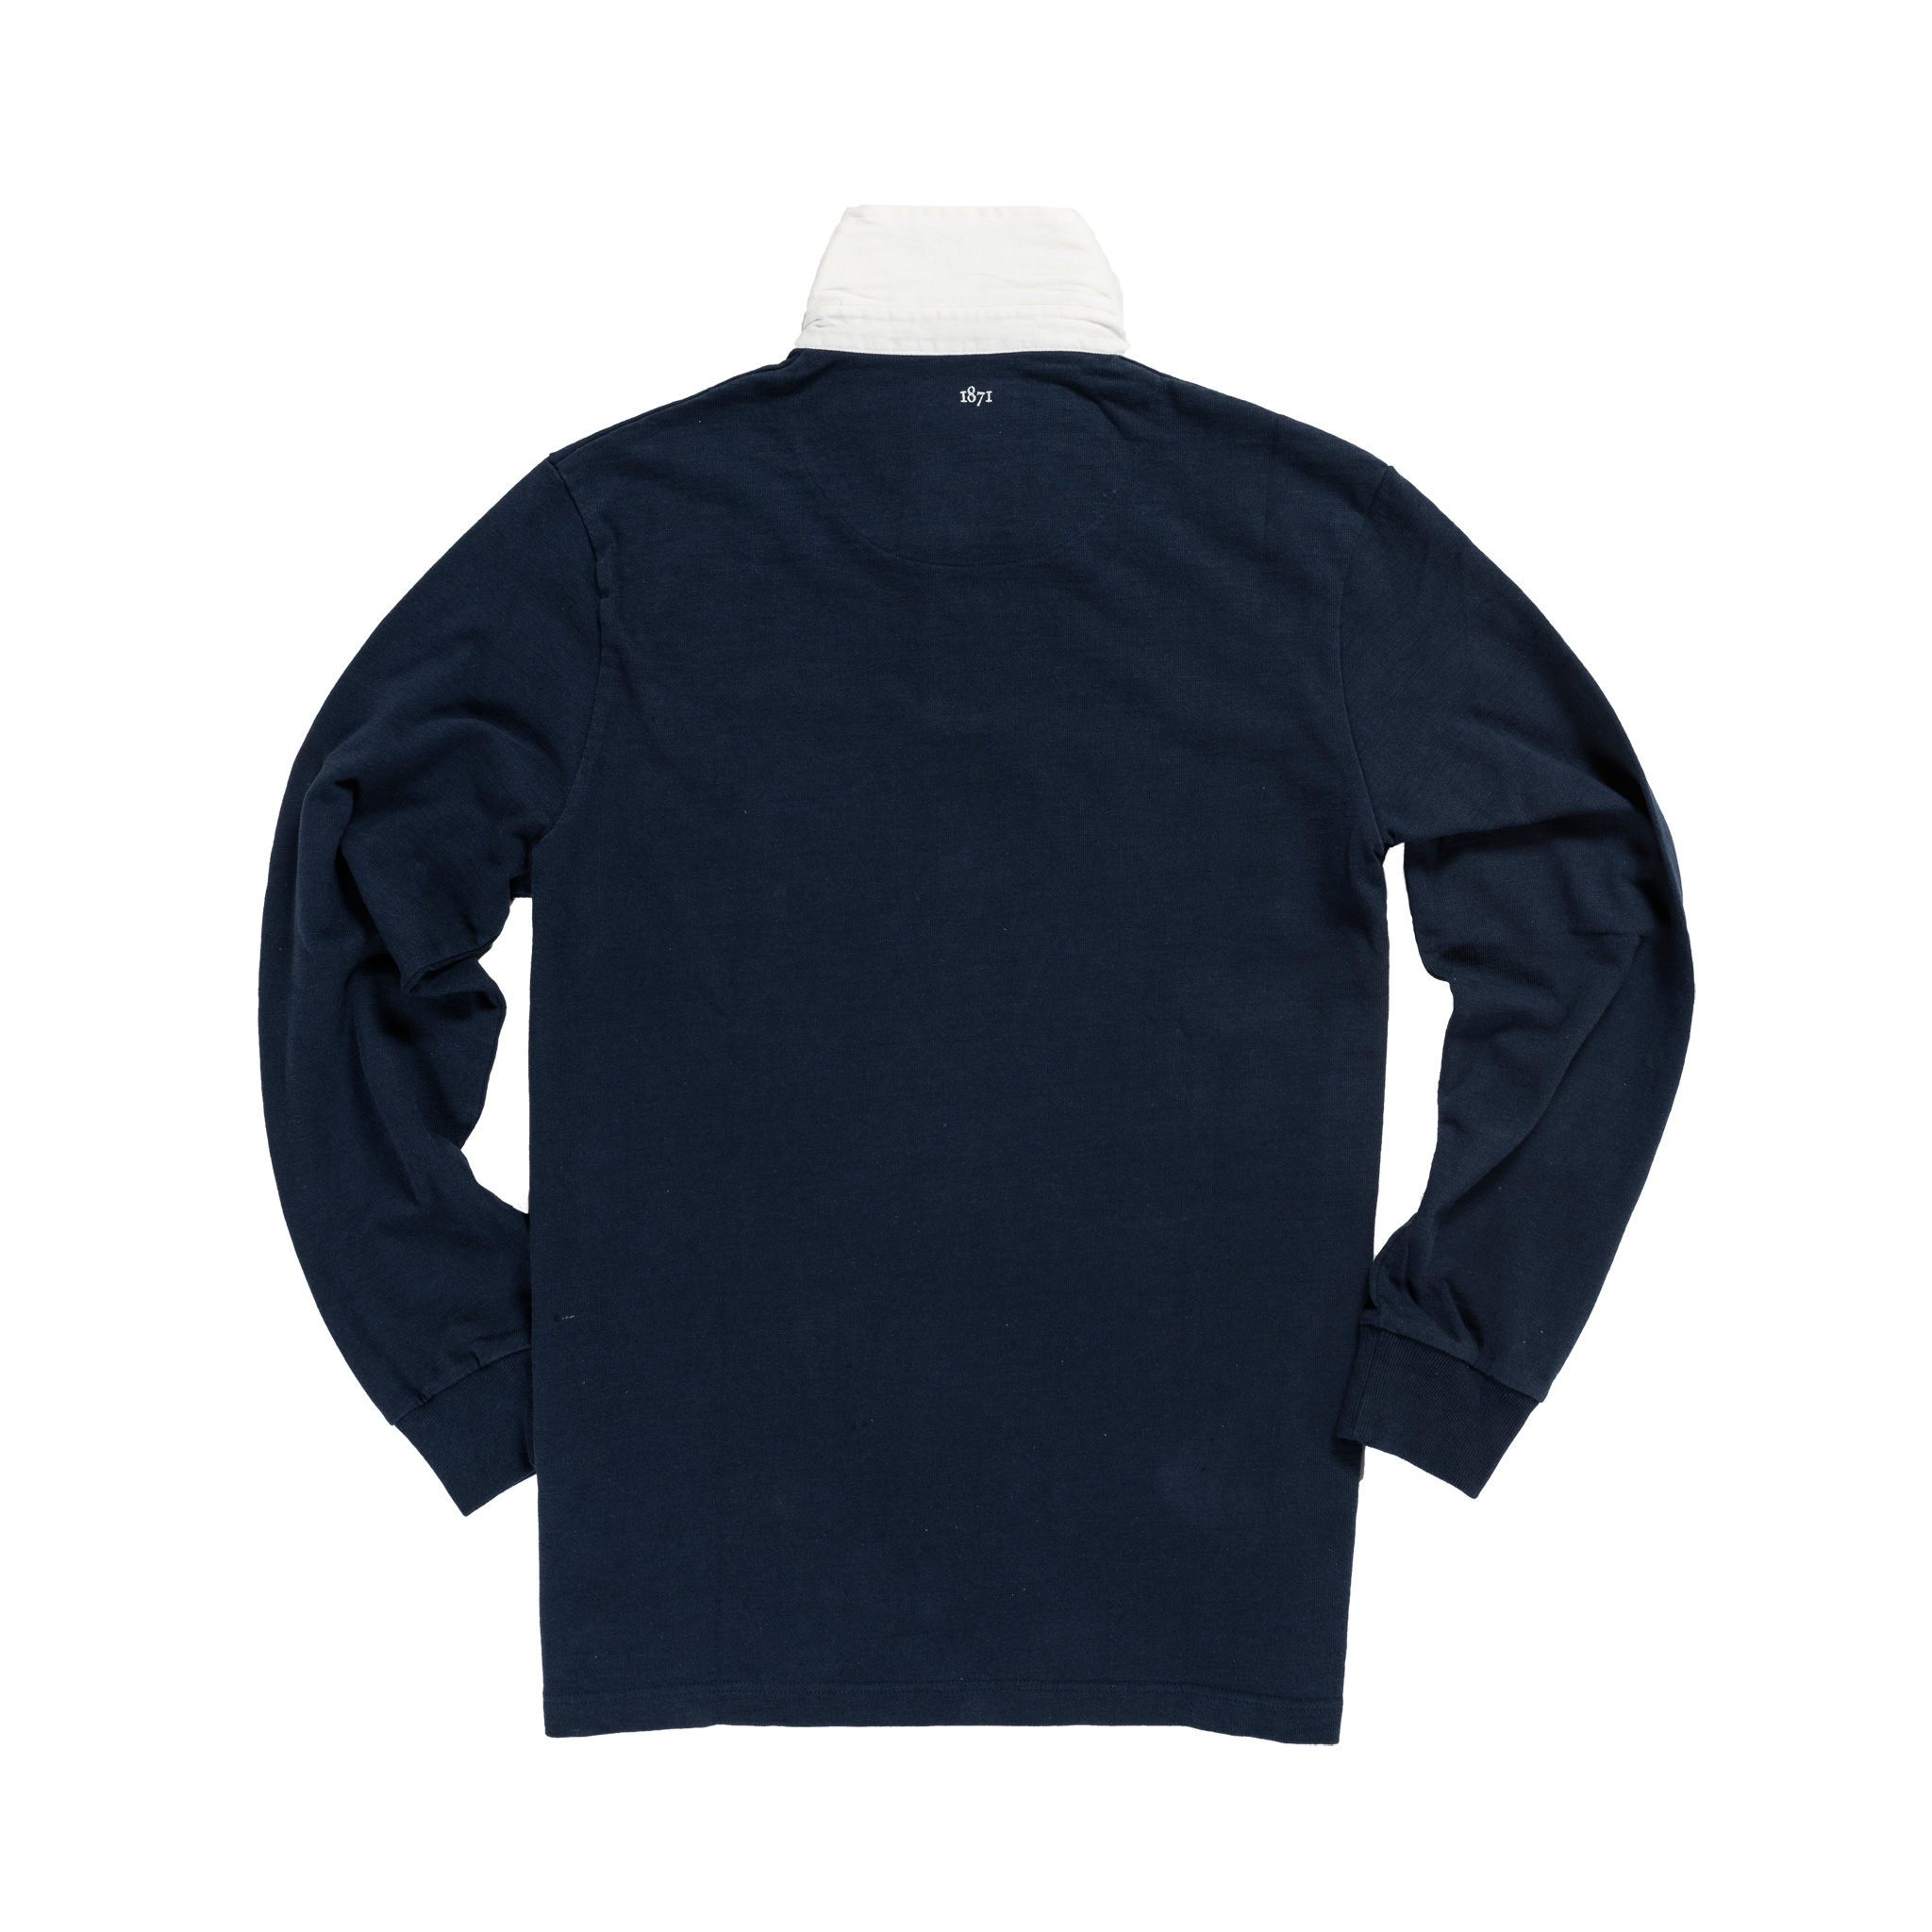 Classic Navy 1871 Vintage Rugby Shirt